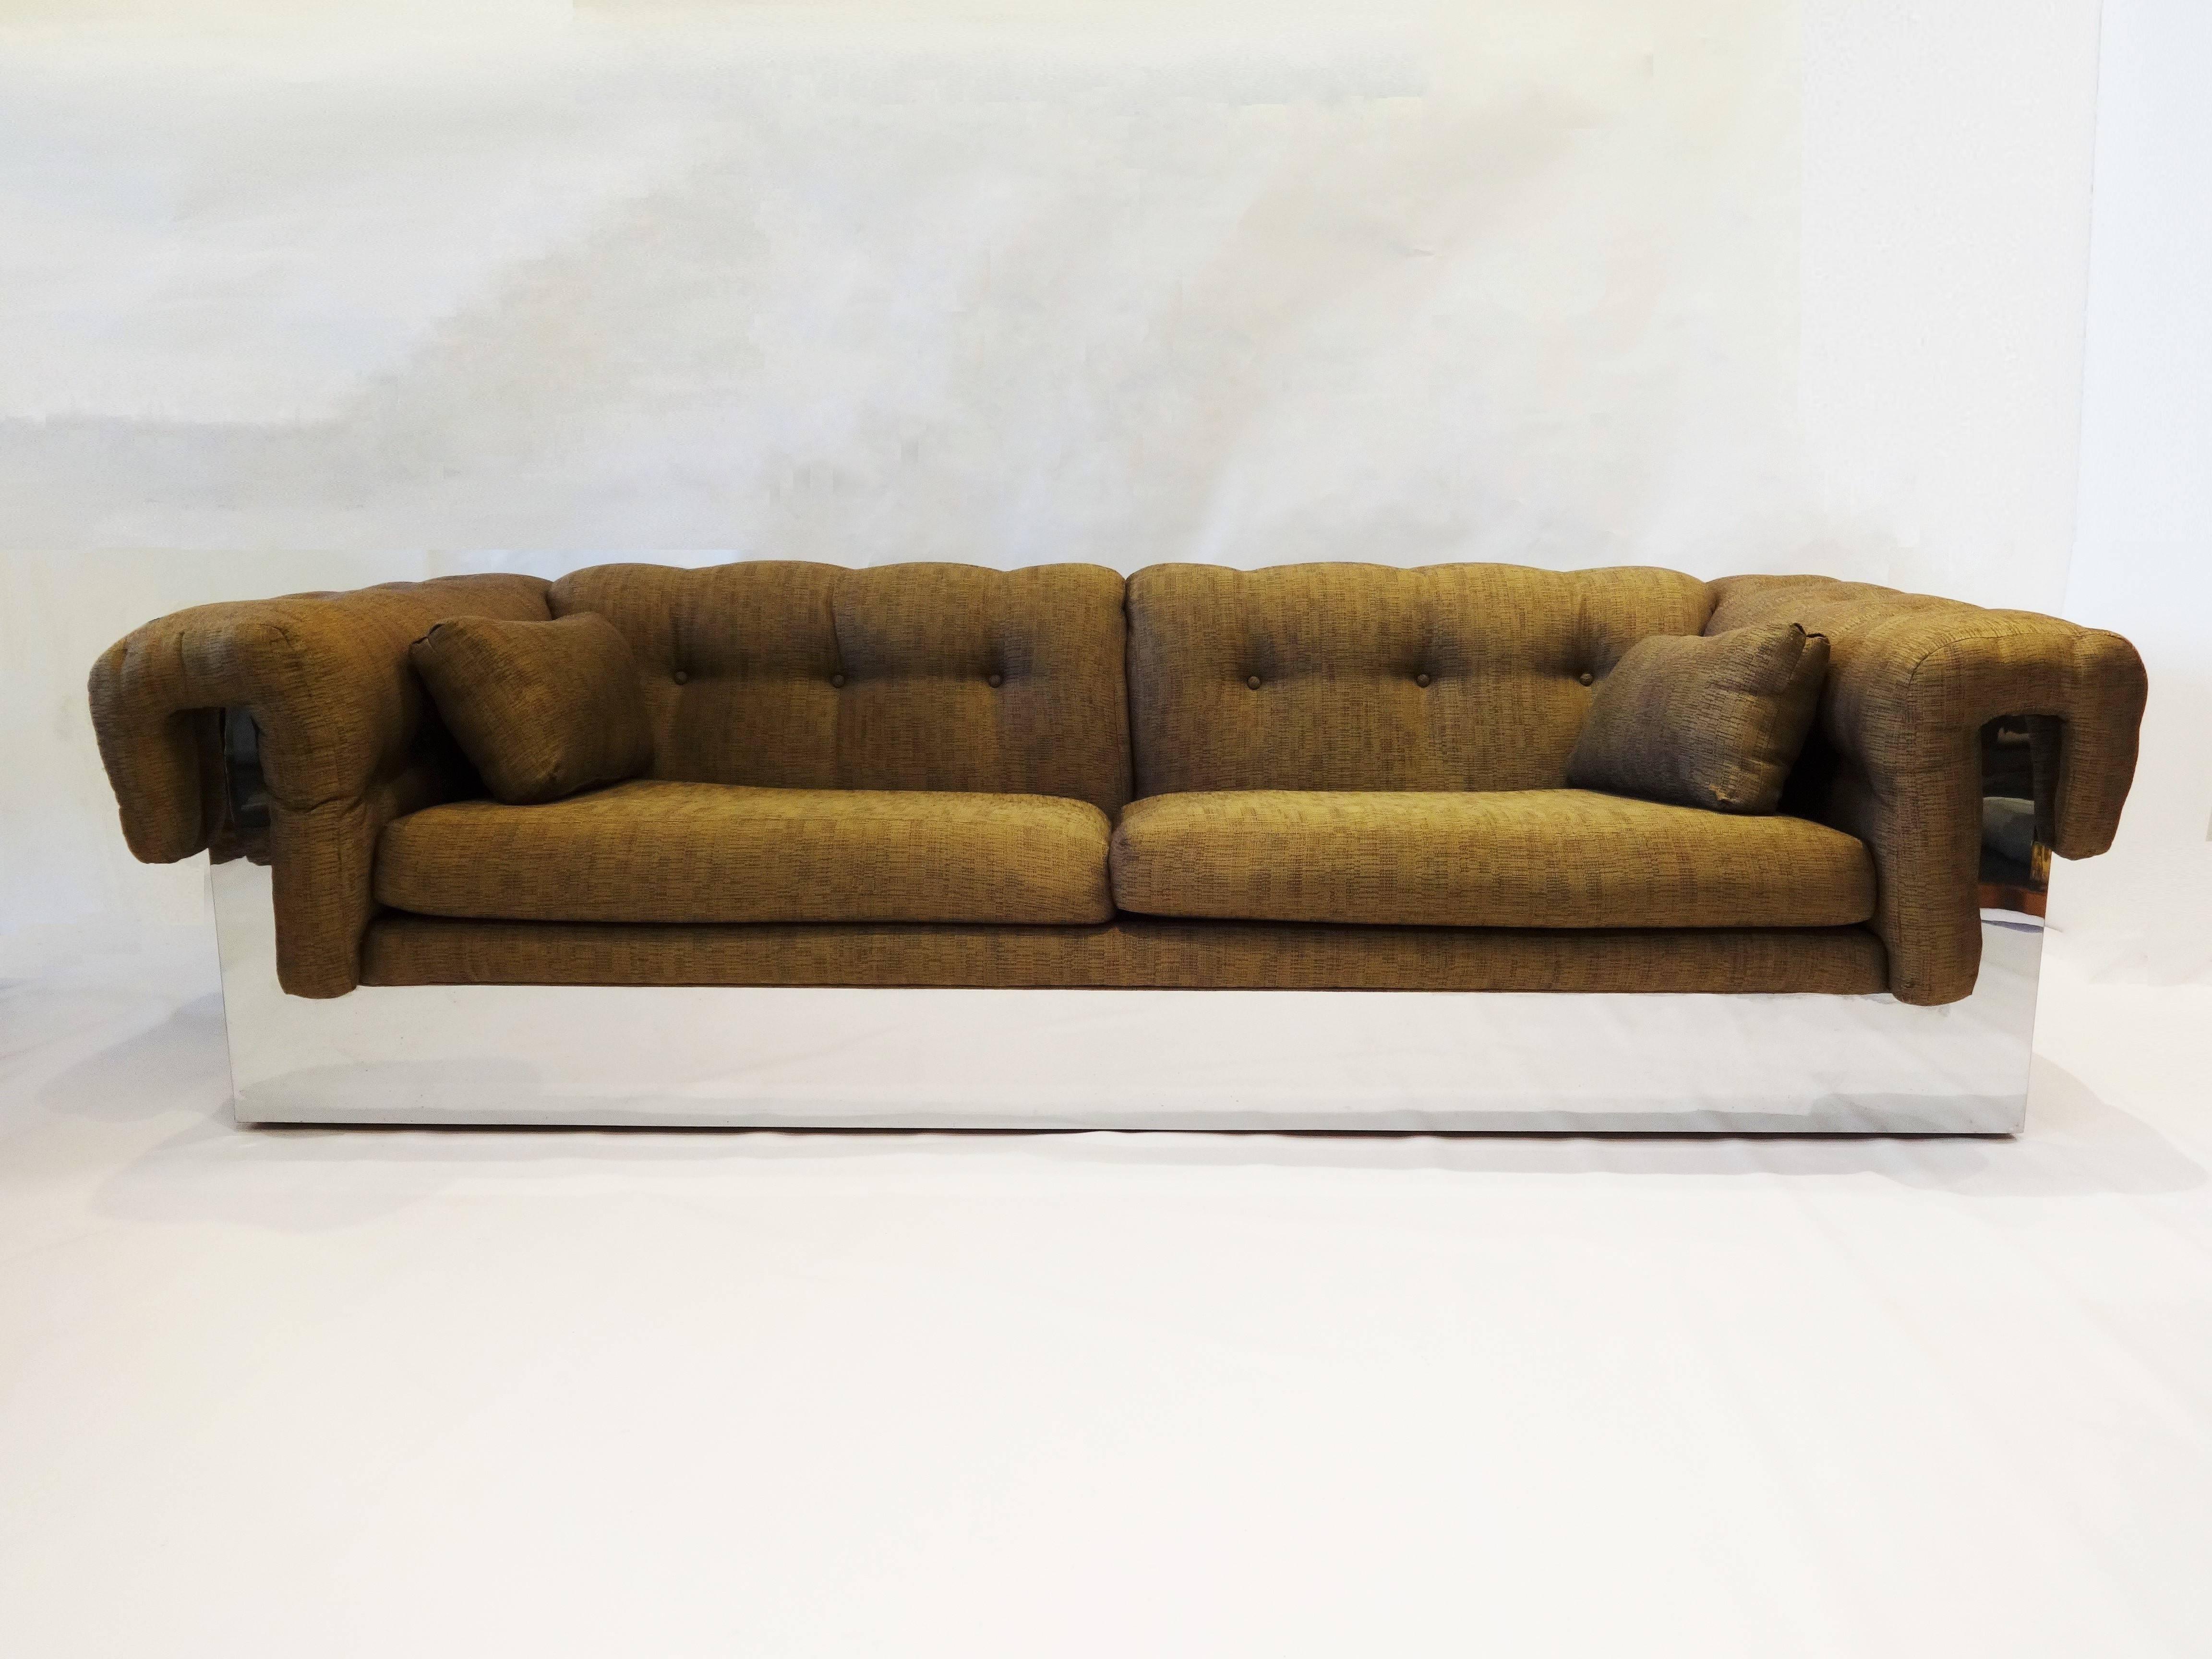 1970s modern sofa designed in the style of Milo Baughman and made by Thayer Coggin. Chrome wraps entire base and forms support for the button tufted arms and back with original upholstery.